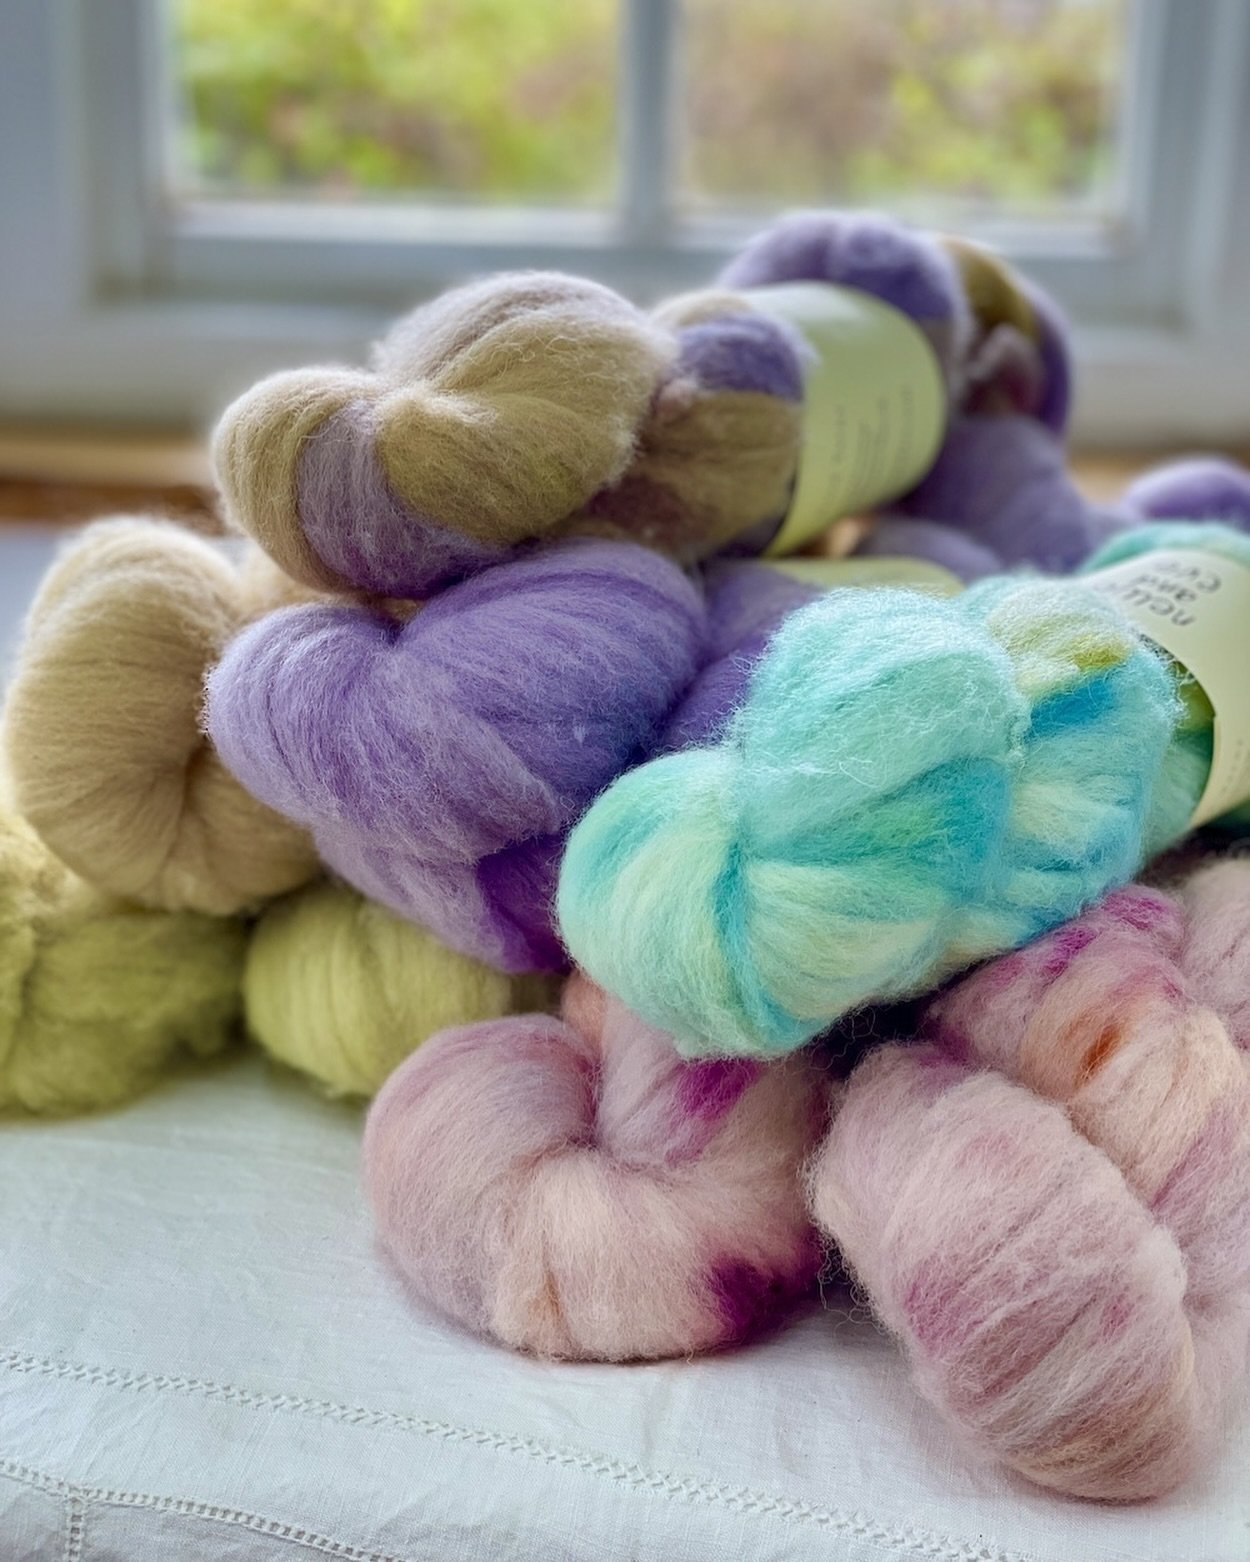 The virtual shelves of the shop have been re-stocked after the weekend&rsquo;s yarn festival&hellip;.
There&rsquo;s also some new products coming tonight including the return of Welsh mule wool fibre tops, a new colour way in the Single Farm BFL (and